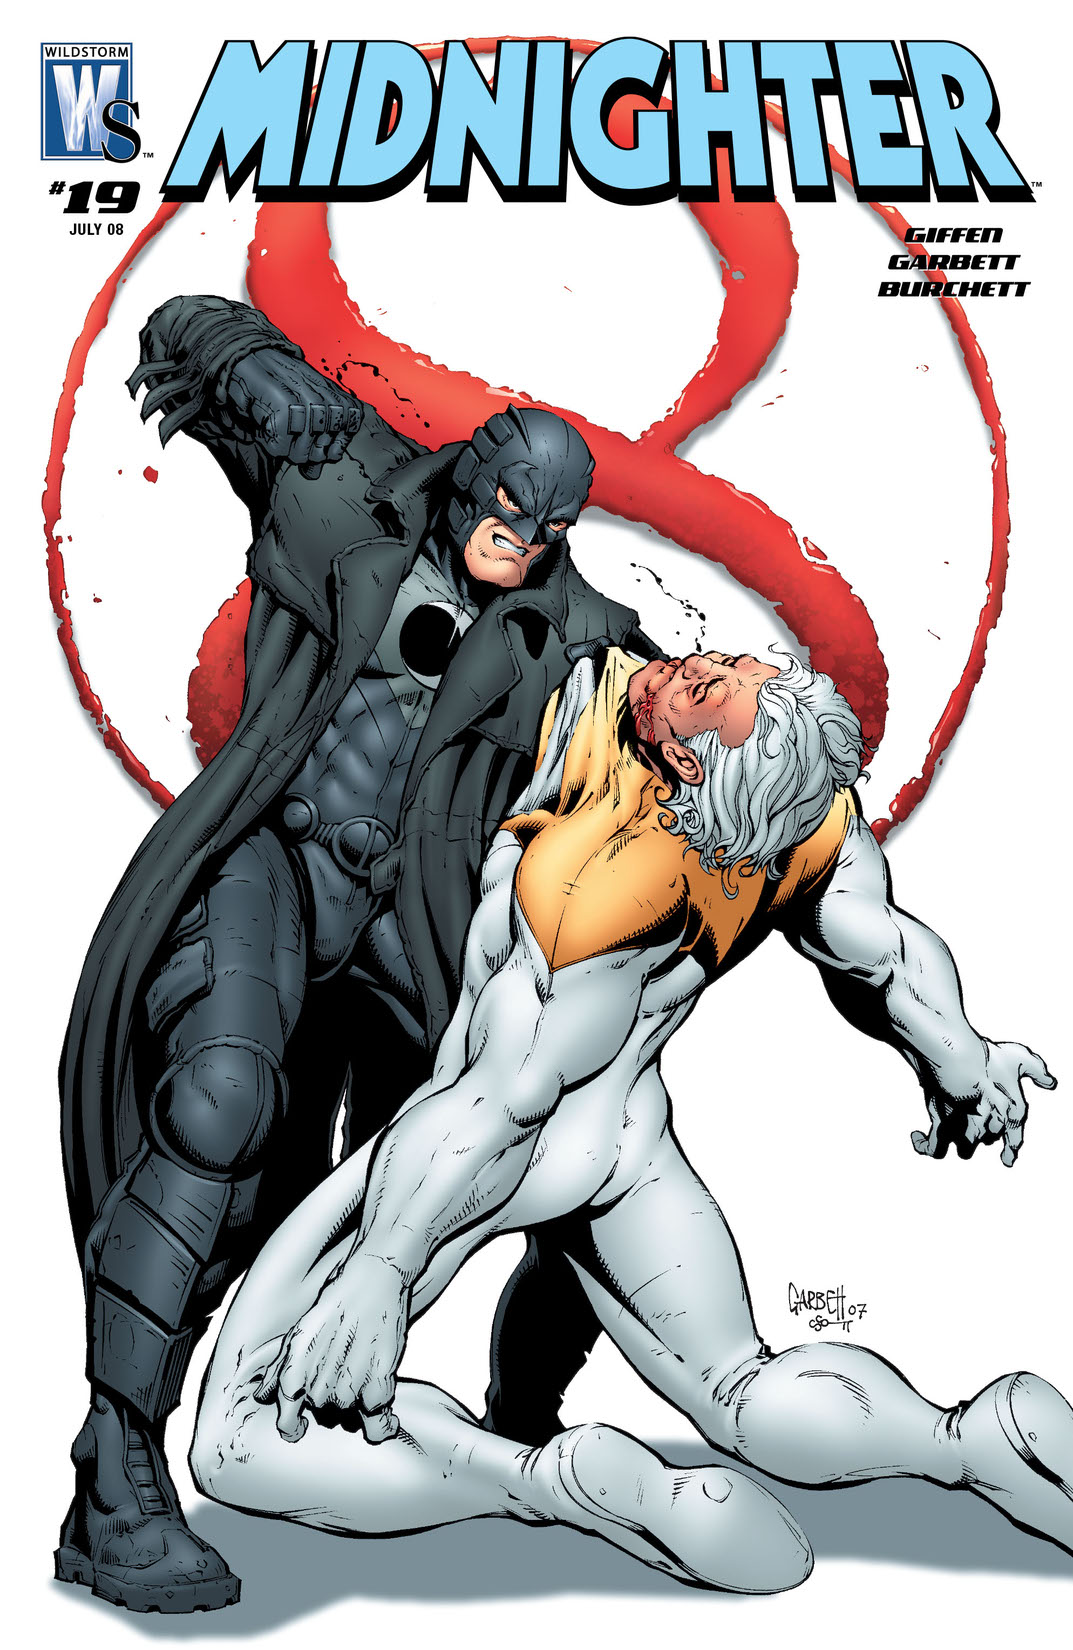 Midnighter (2006-) #19 preview images